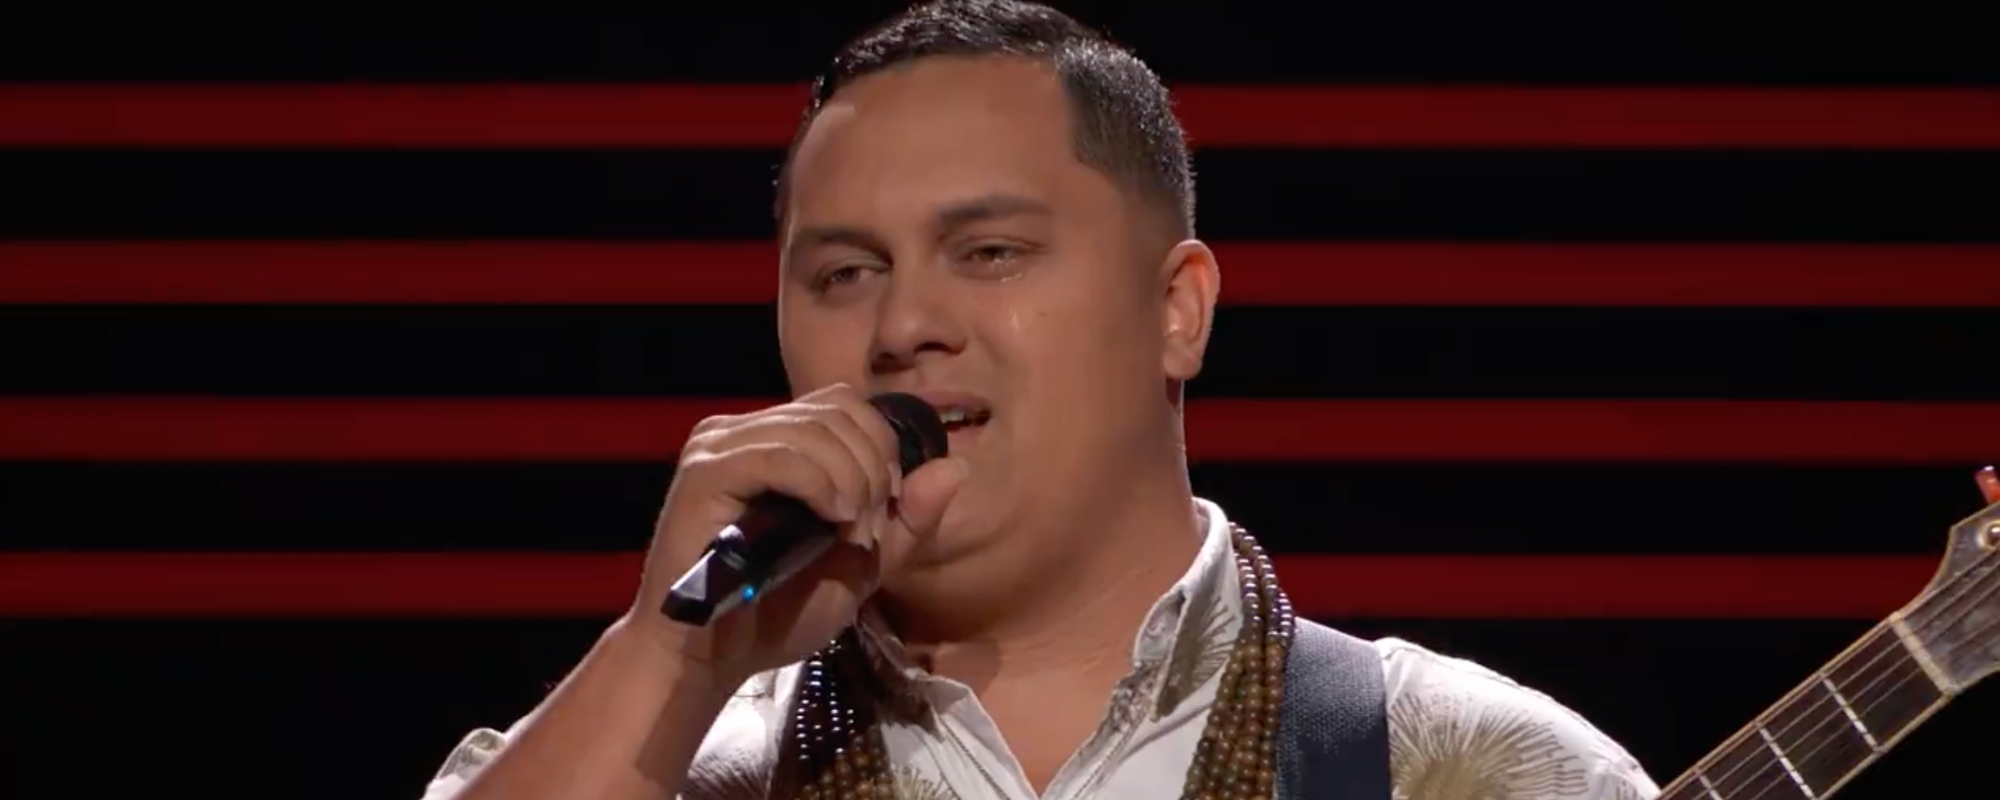 ‘The Voice’: Chance the Rapper Leaves Kamalei Kawa’a in Tears for Huge “Redemption” Moment